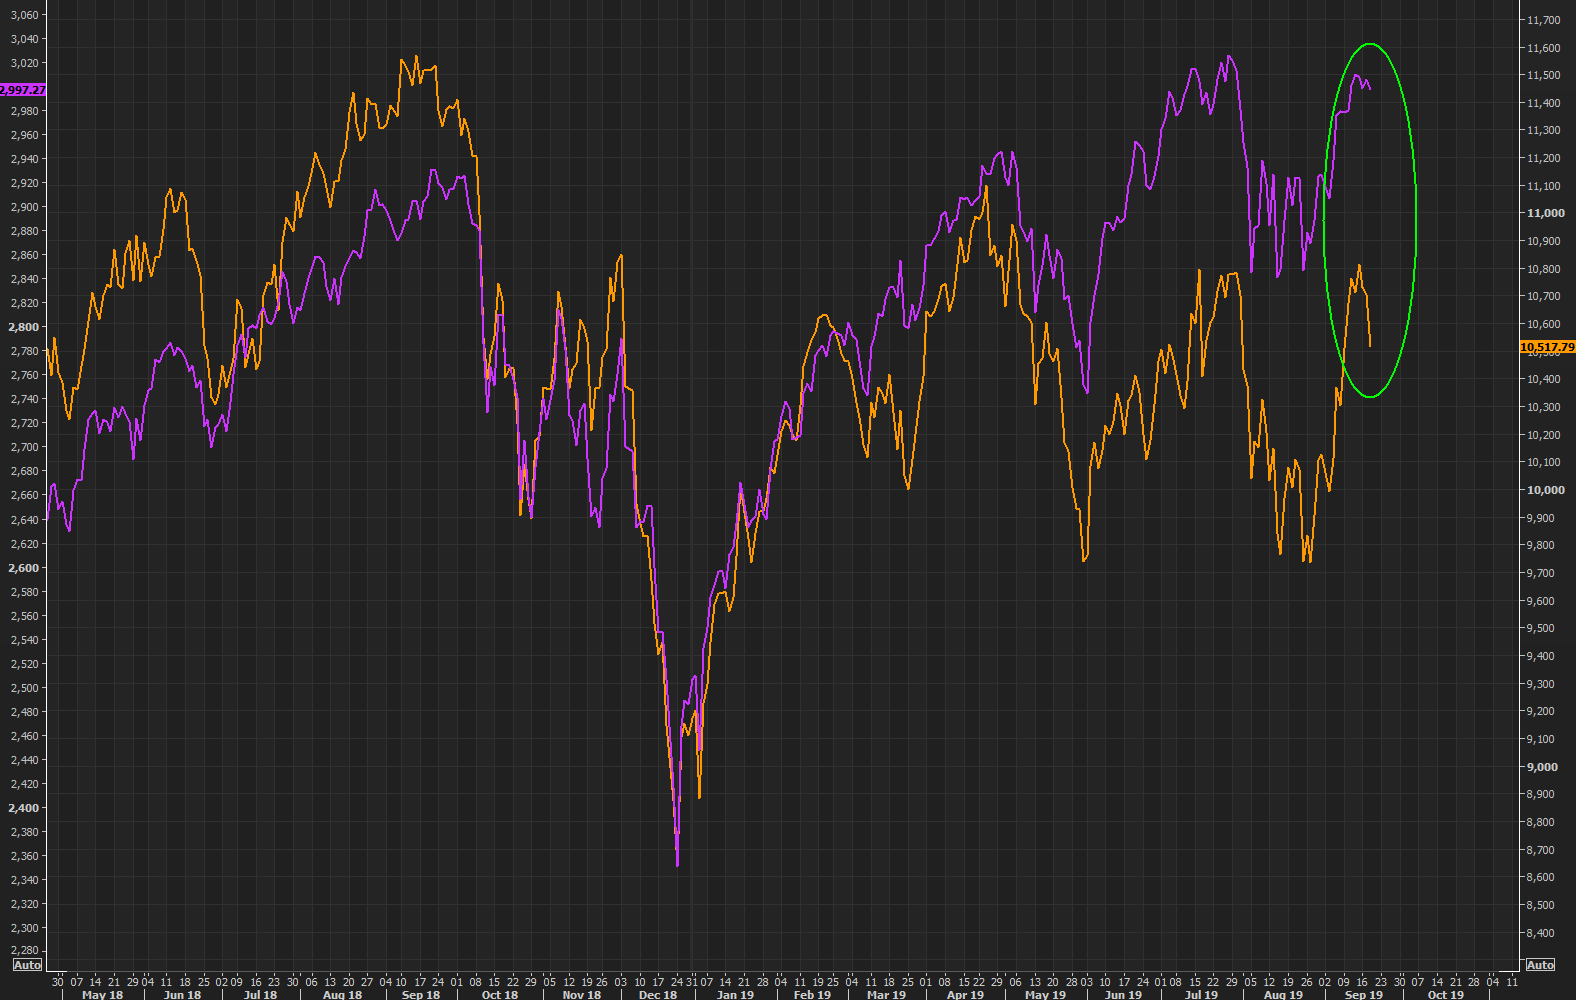 Transport index falling hard for obvious reasons today and the SPX vs Trannies gap getting wider